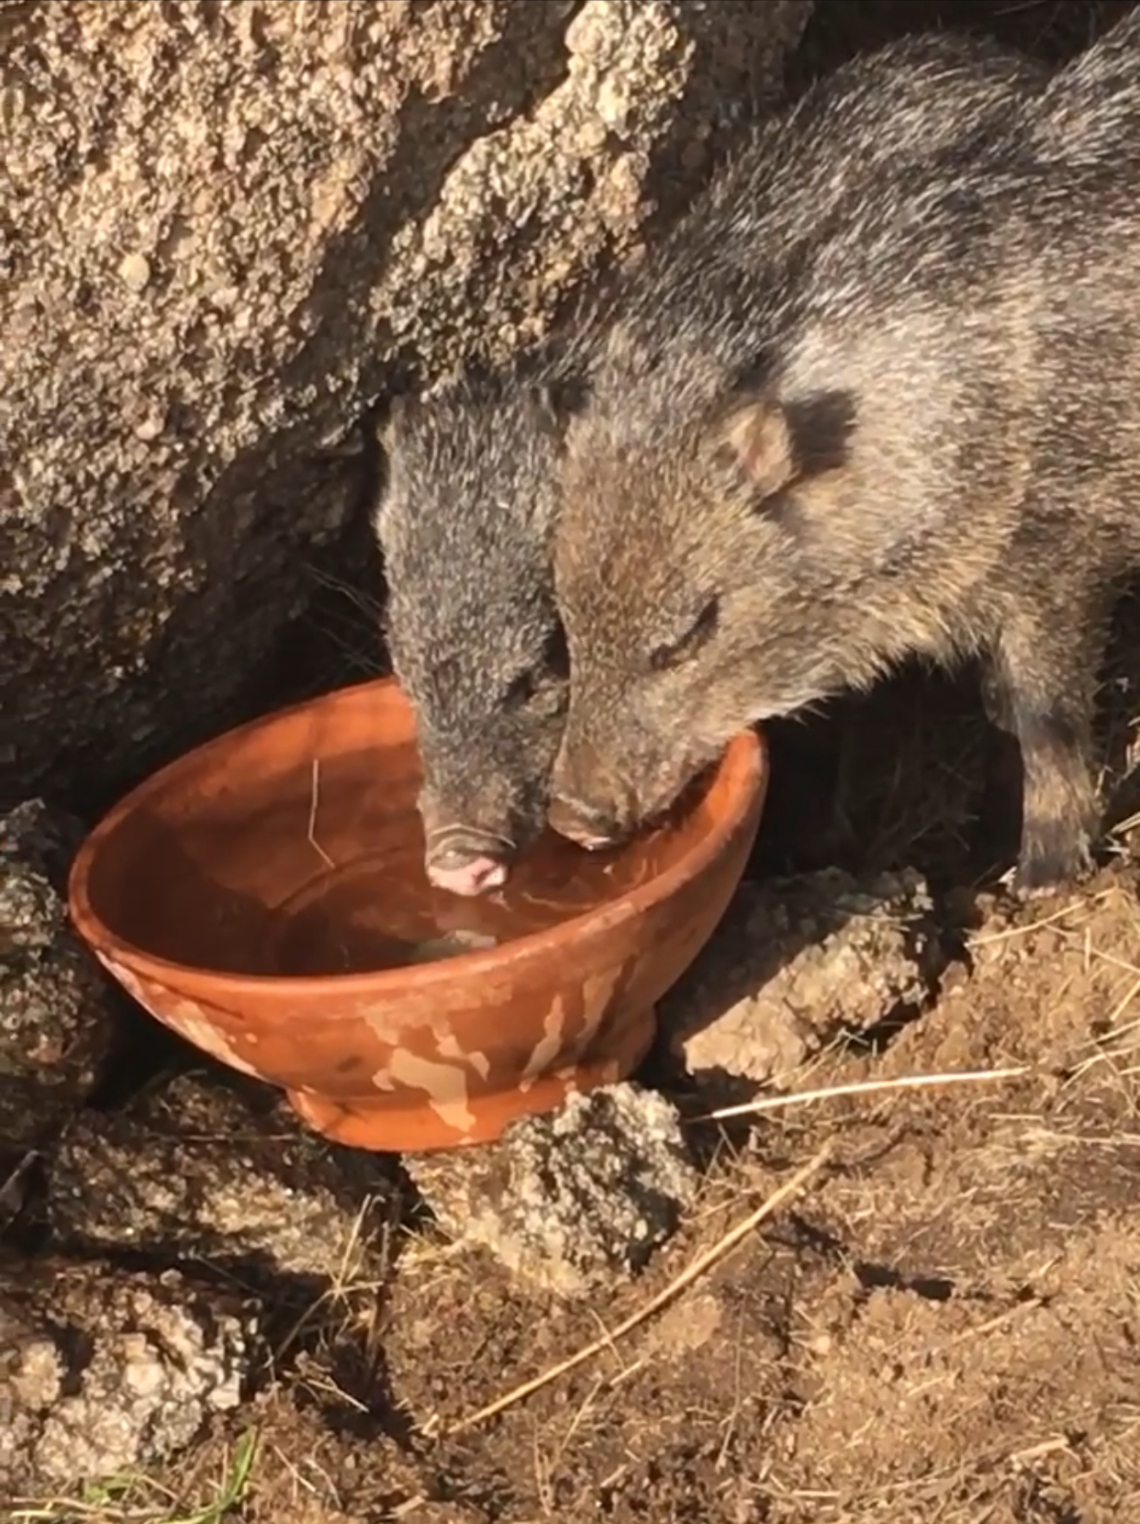 Donna Vetter photo showing two Javelinas drinkng from a bowl